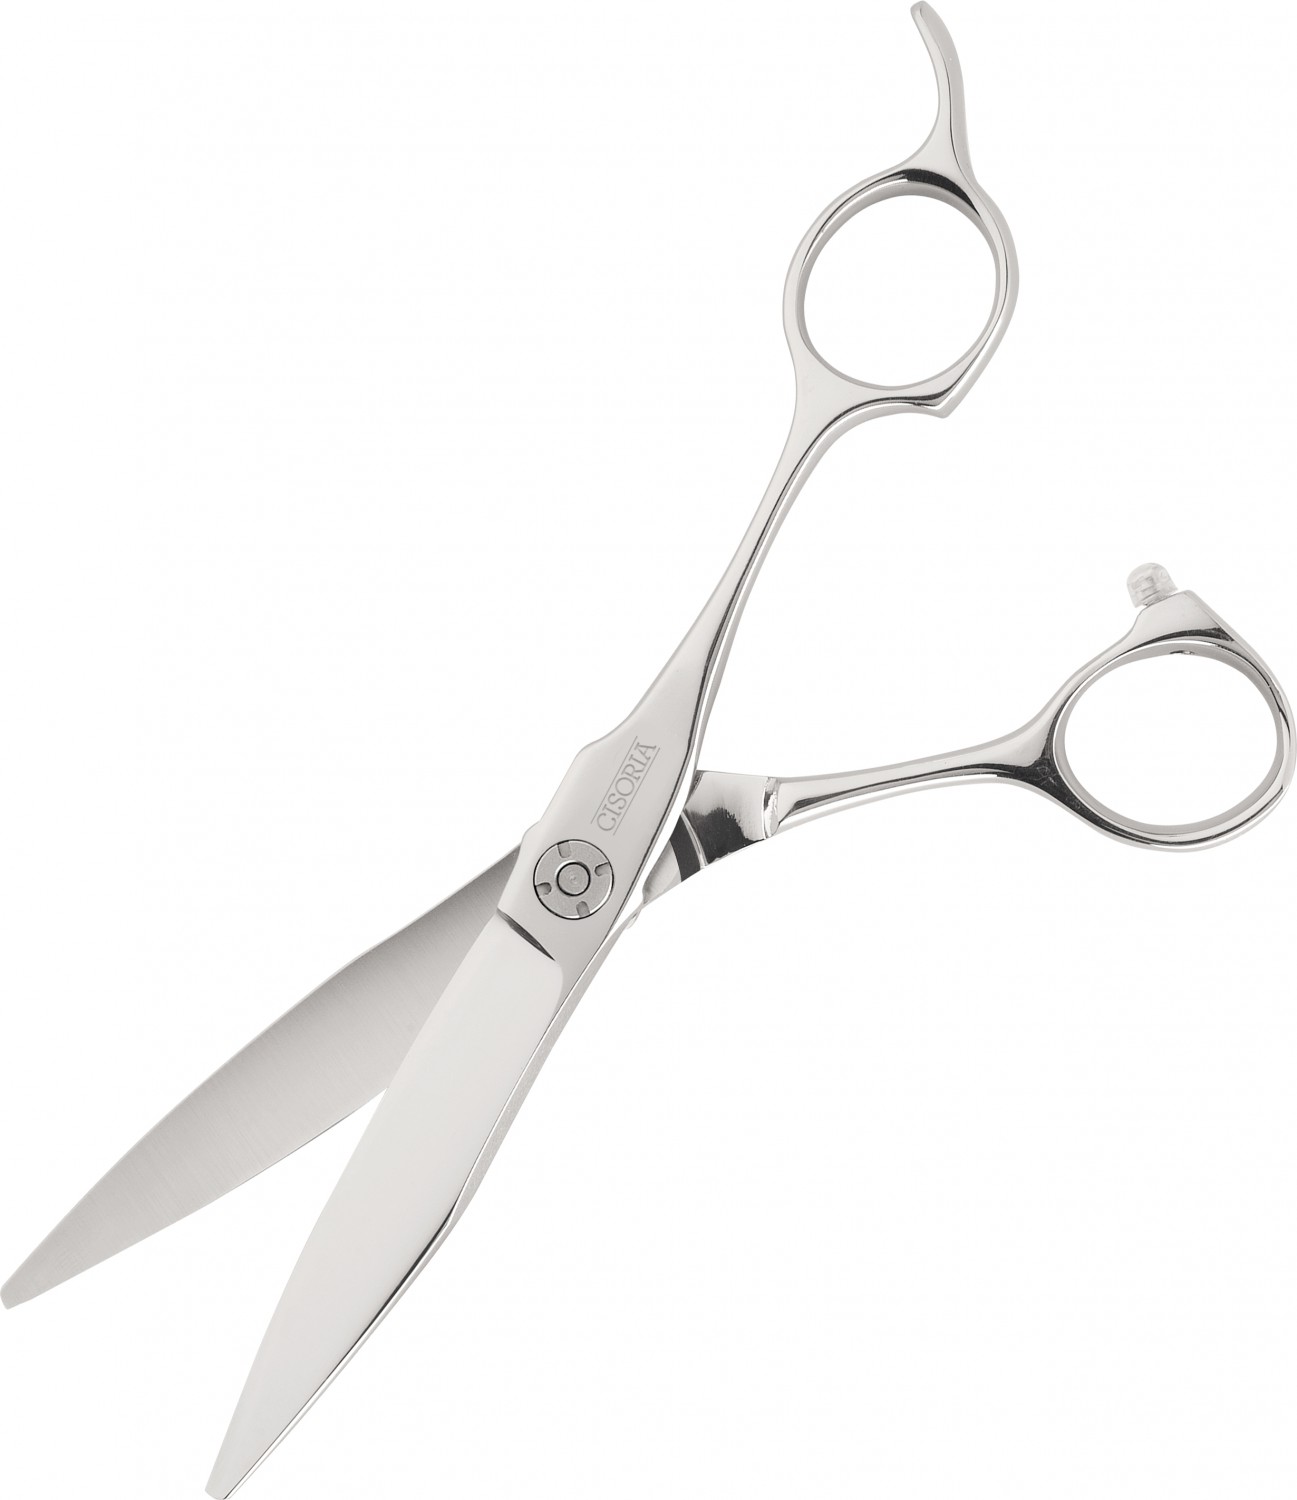  Cisoria Offset Cutting Scissors 6,25" OX625 by Sibel 